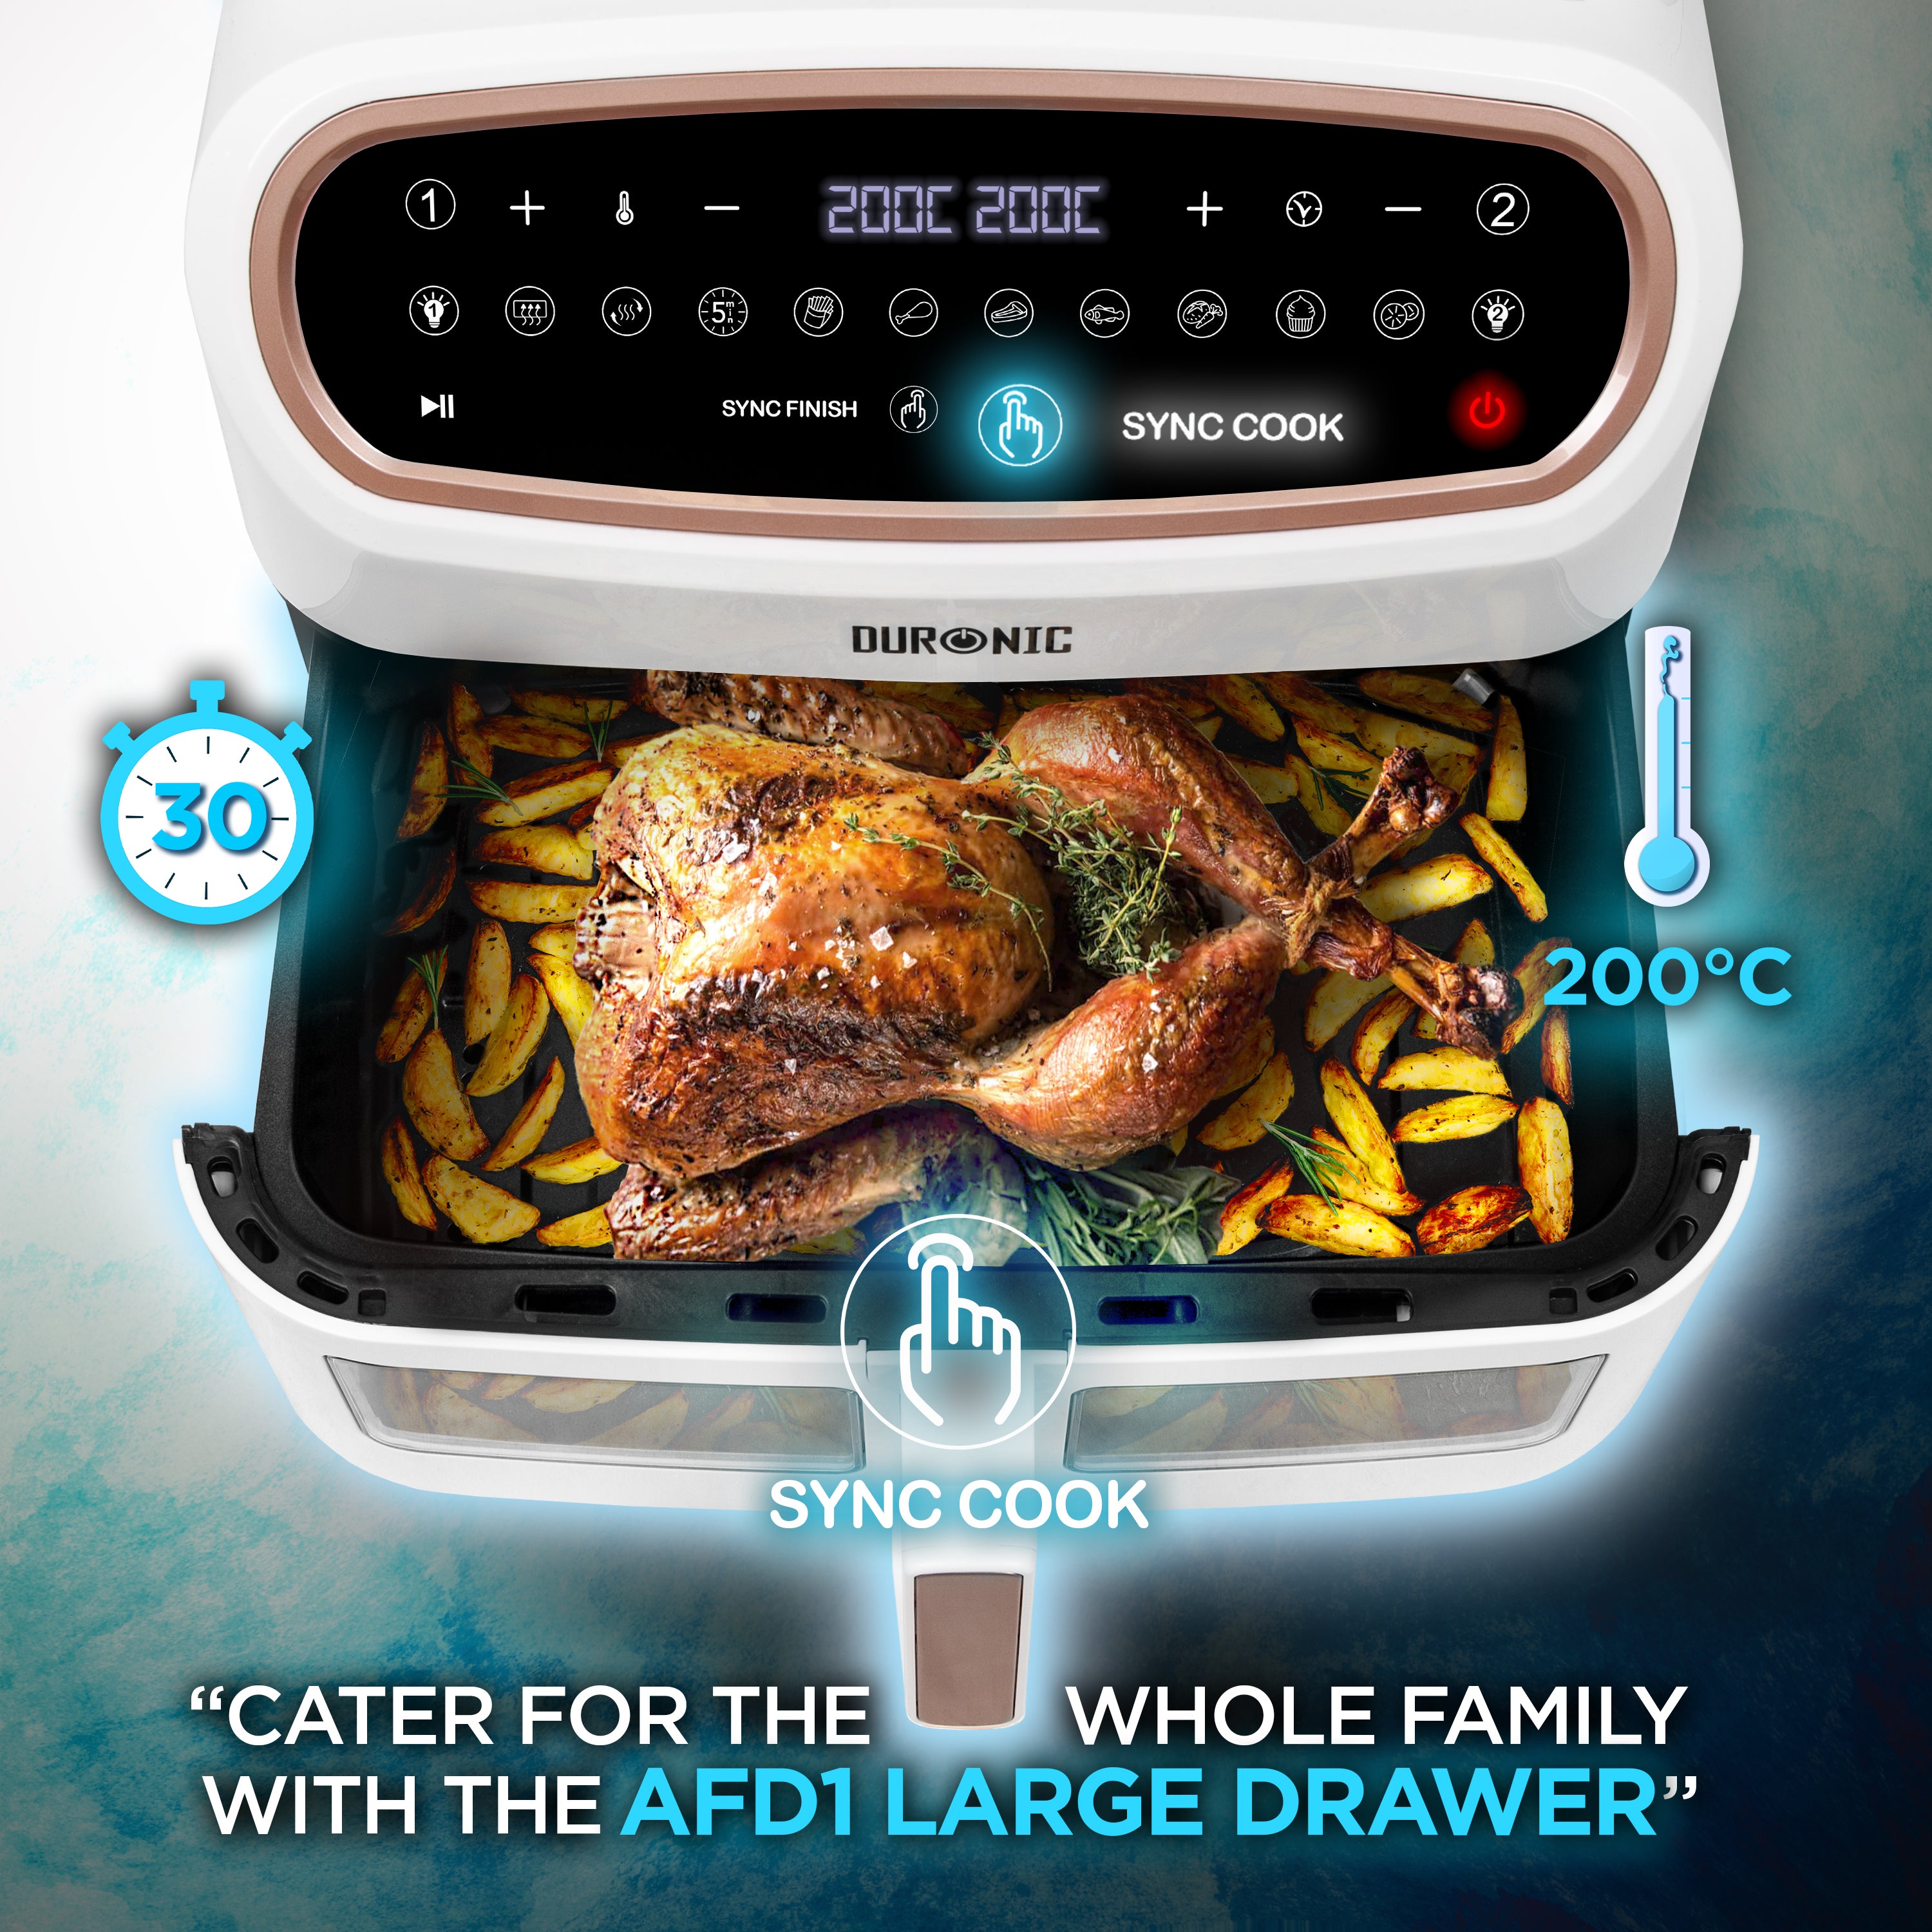 Duronic Dual Air Fryer with Visual Window AF34 WE White and Gold, 3 draws Included, Dual Zone Family Sized Multi Cooker, 1 x 10L Large Drawer, 2 x 5L Twin Drawers